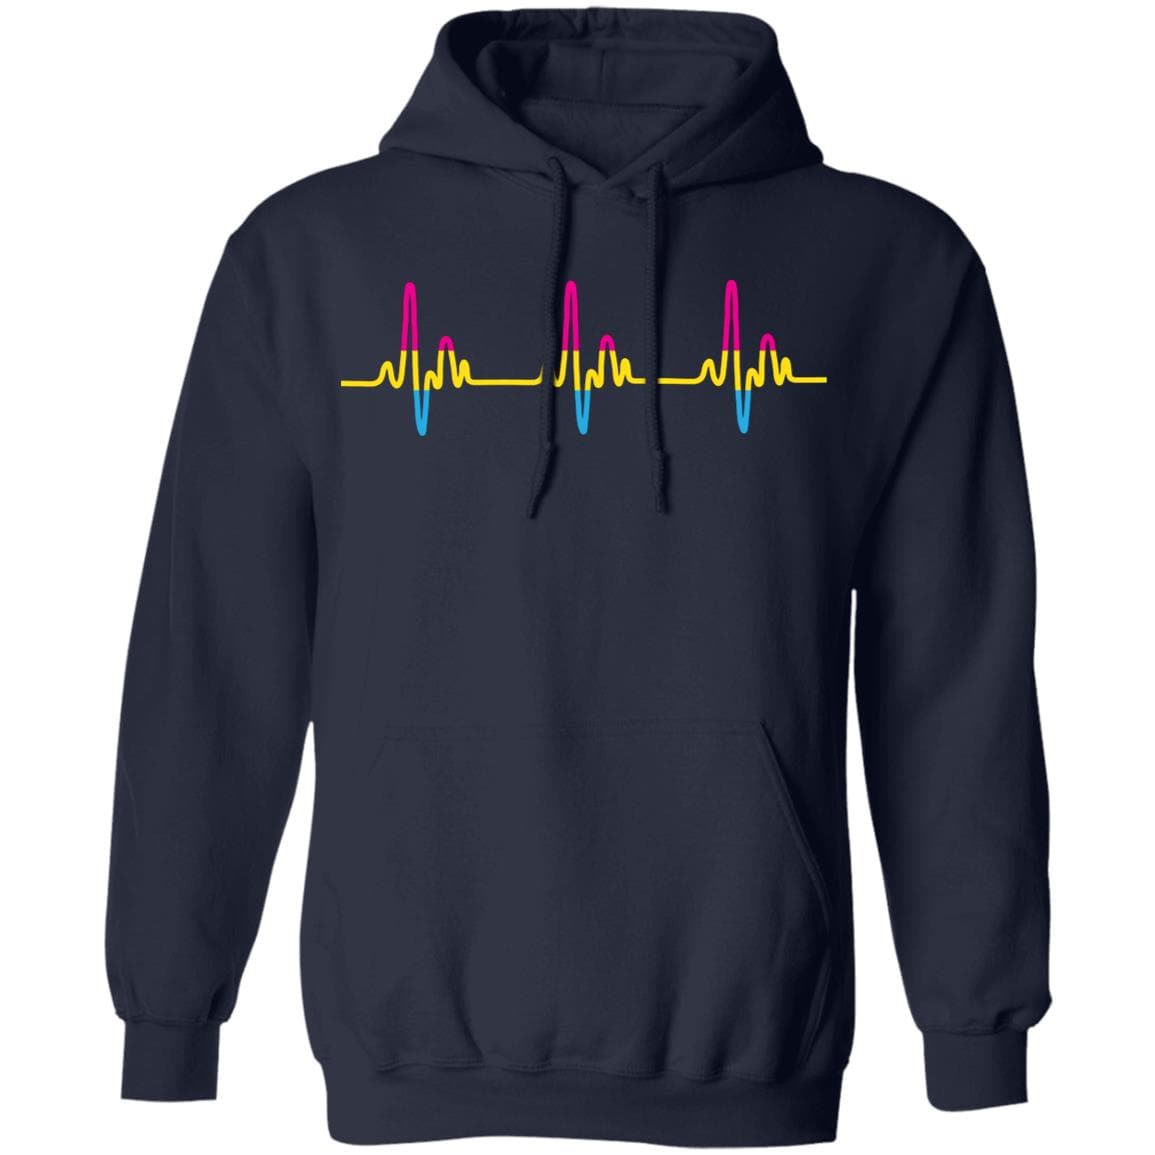 Pansexual Heartbeat Shirt - PrideBooth